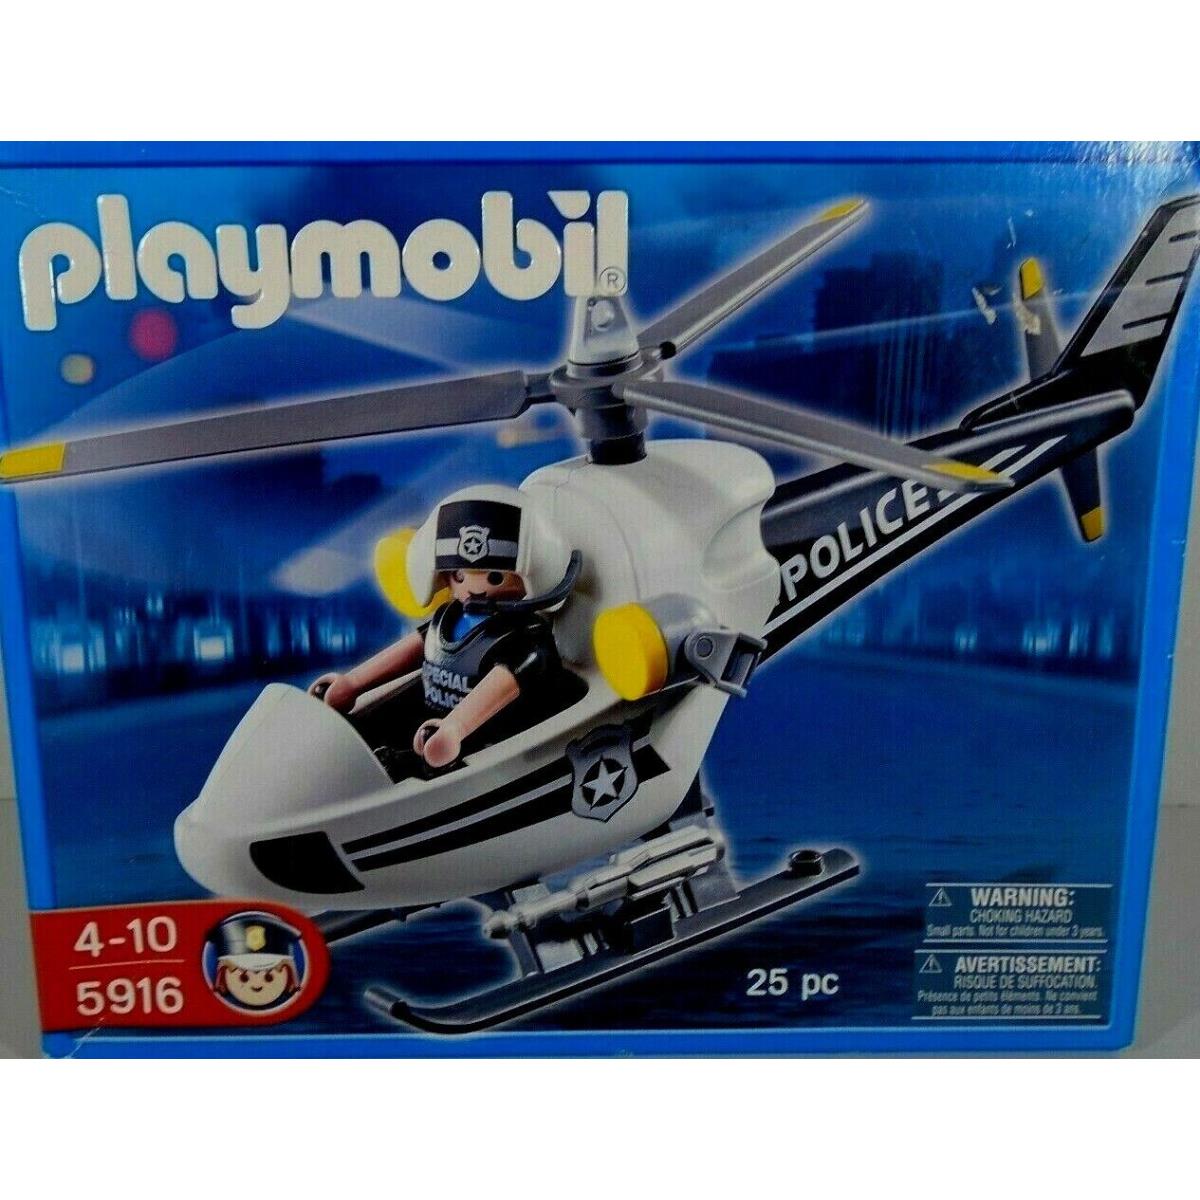 Playmobil 5916 Police Helicopter and Pilot 25 Pieces